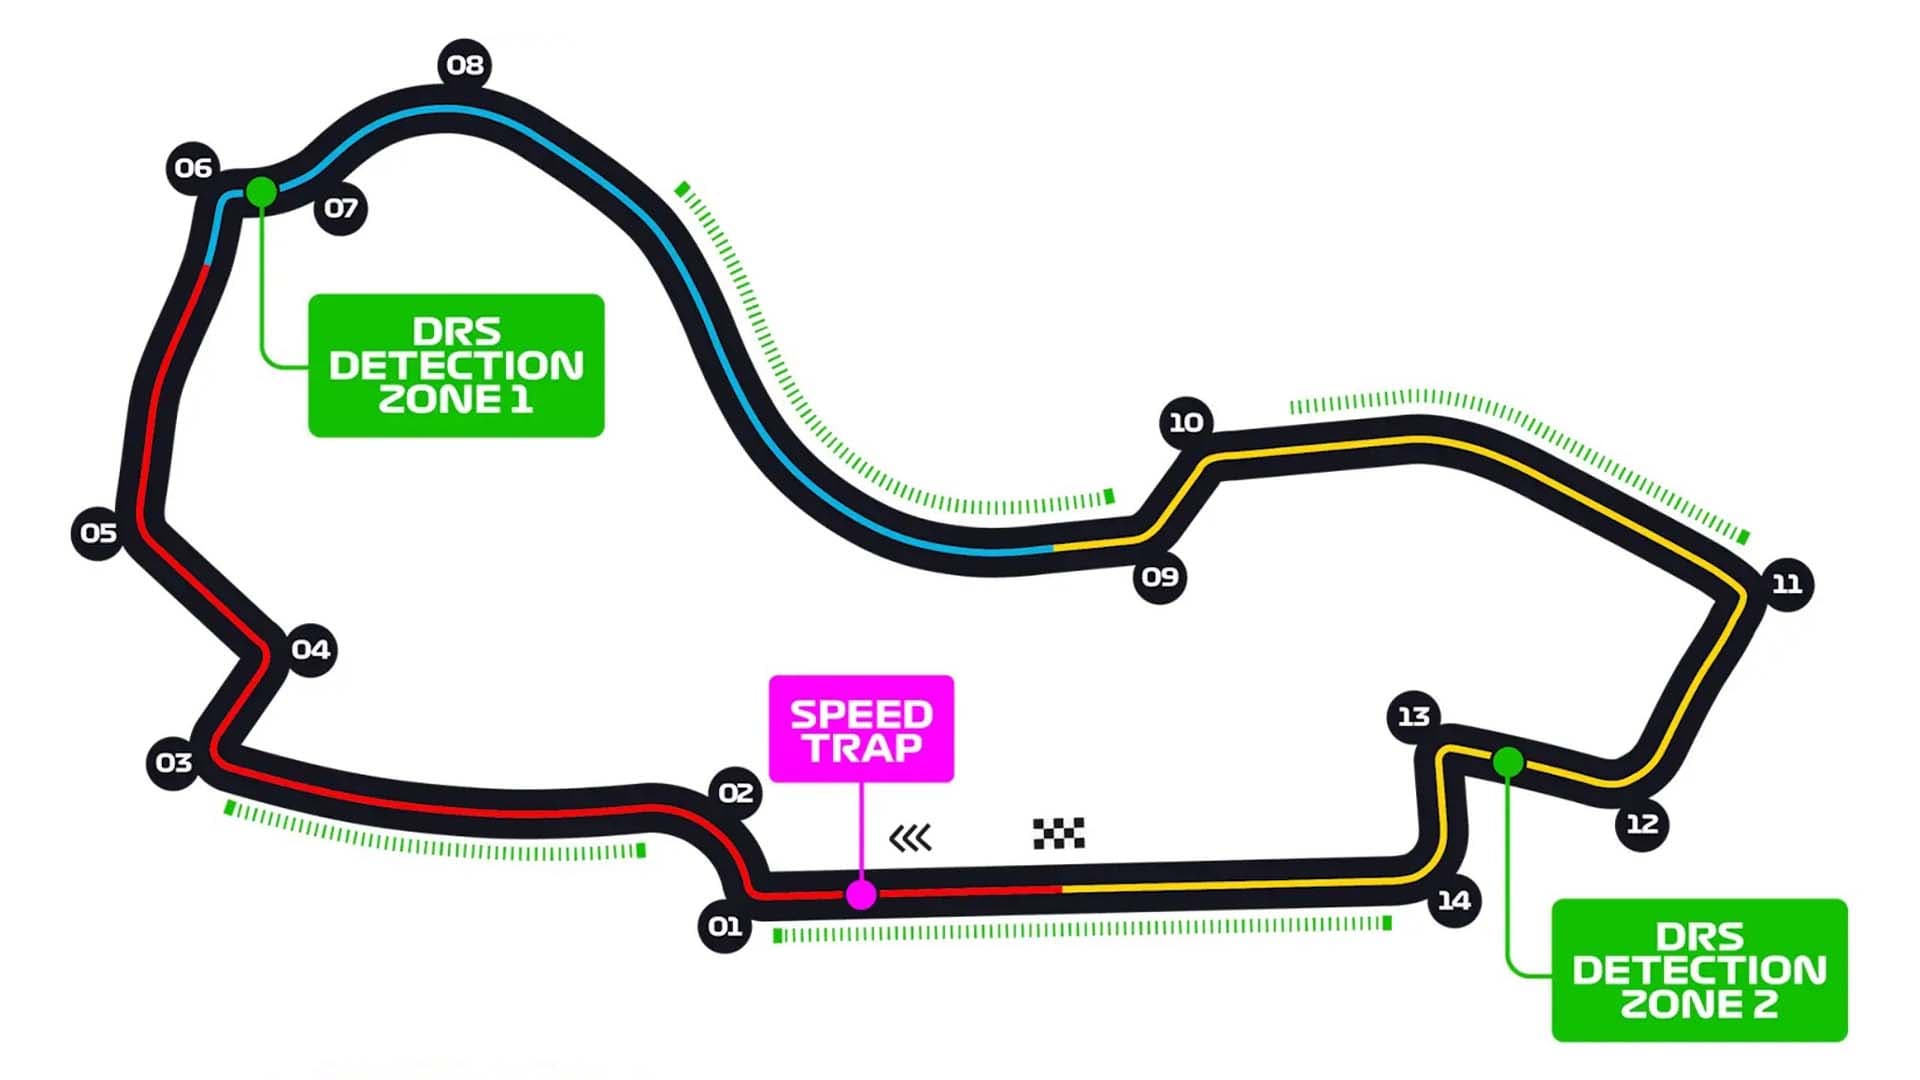 F1’s Updated Australian GP Track Has Four DRS Zones for Lots of Passing